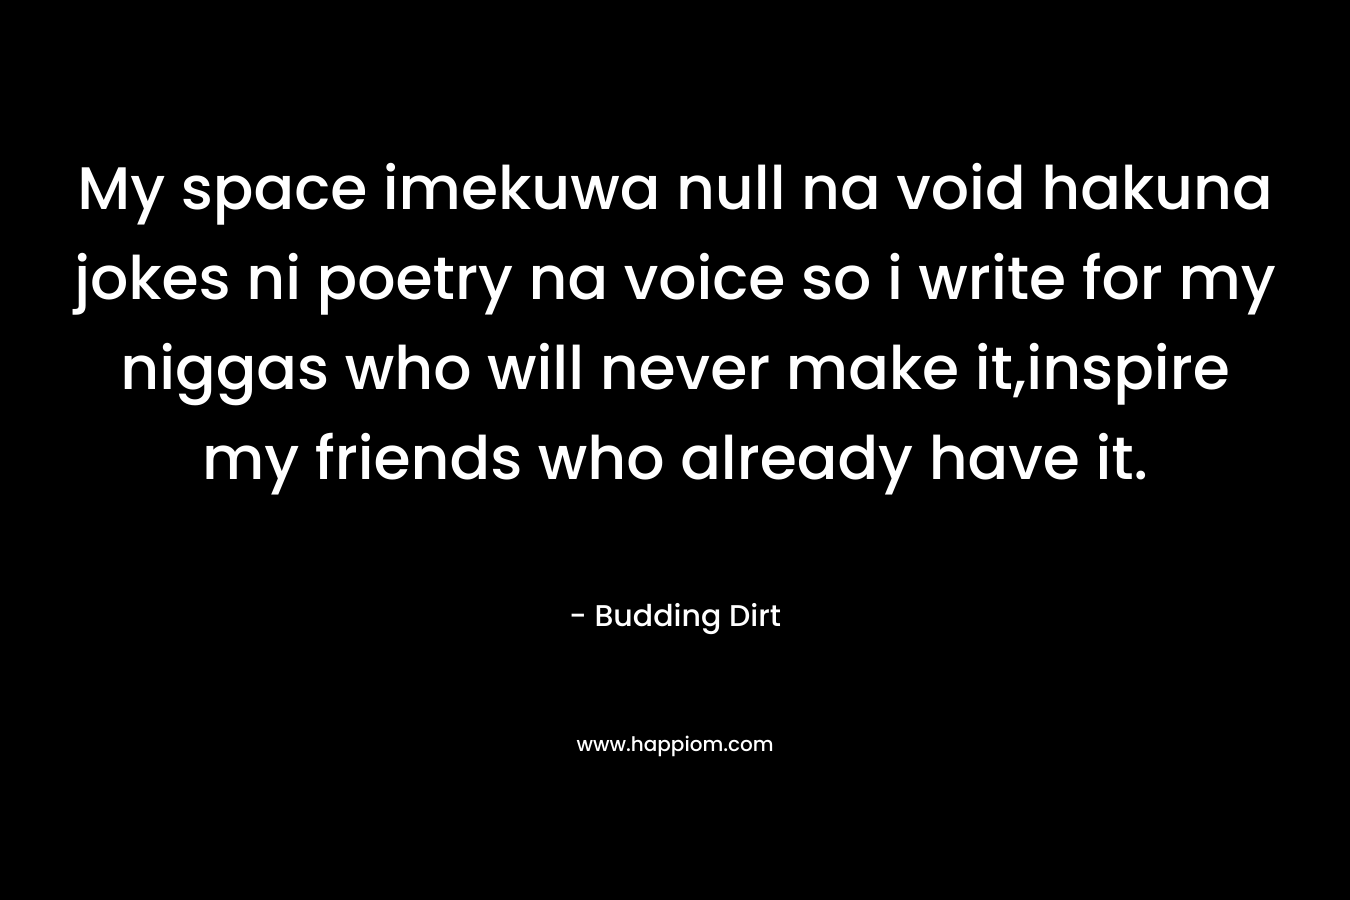 My space imekuwa null na void hakuna jokes ni poetry na voice so i write for my niggas who will never make it,inspire my friends who already have it.